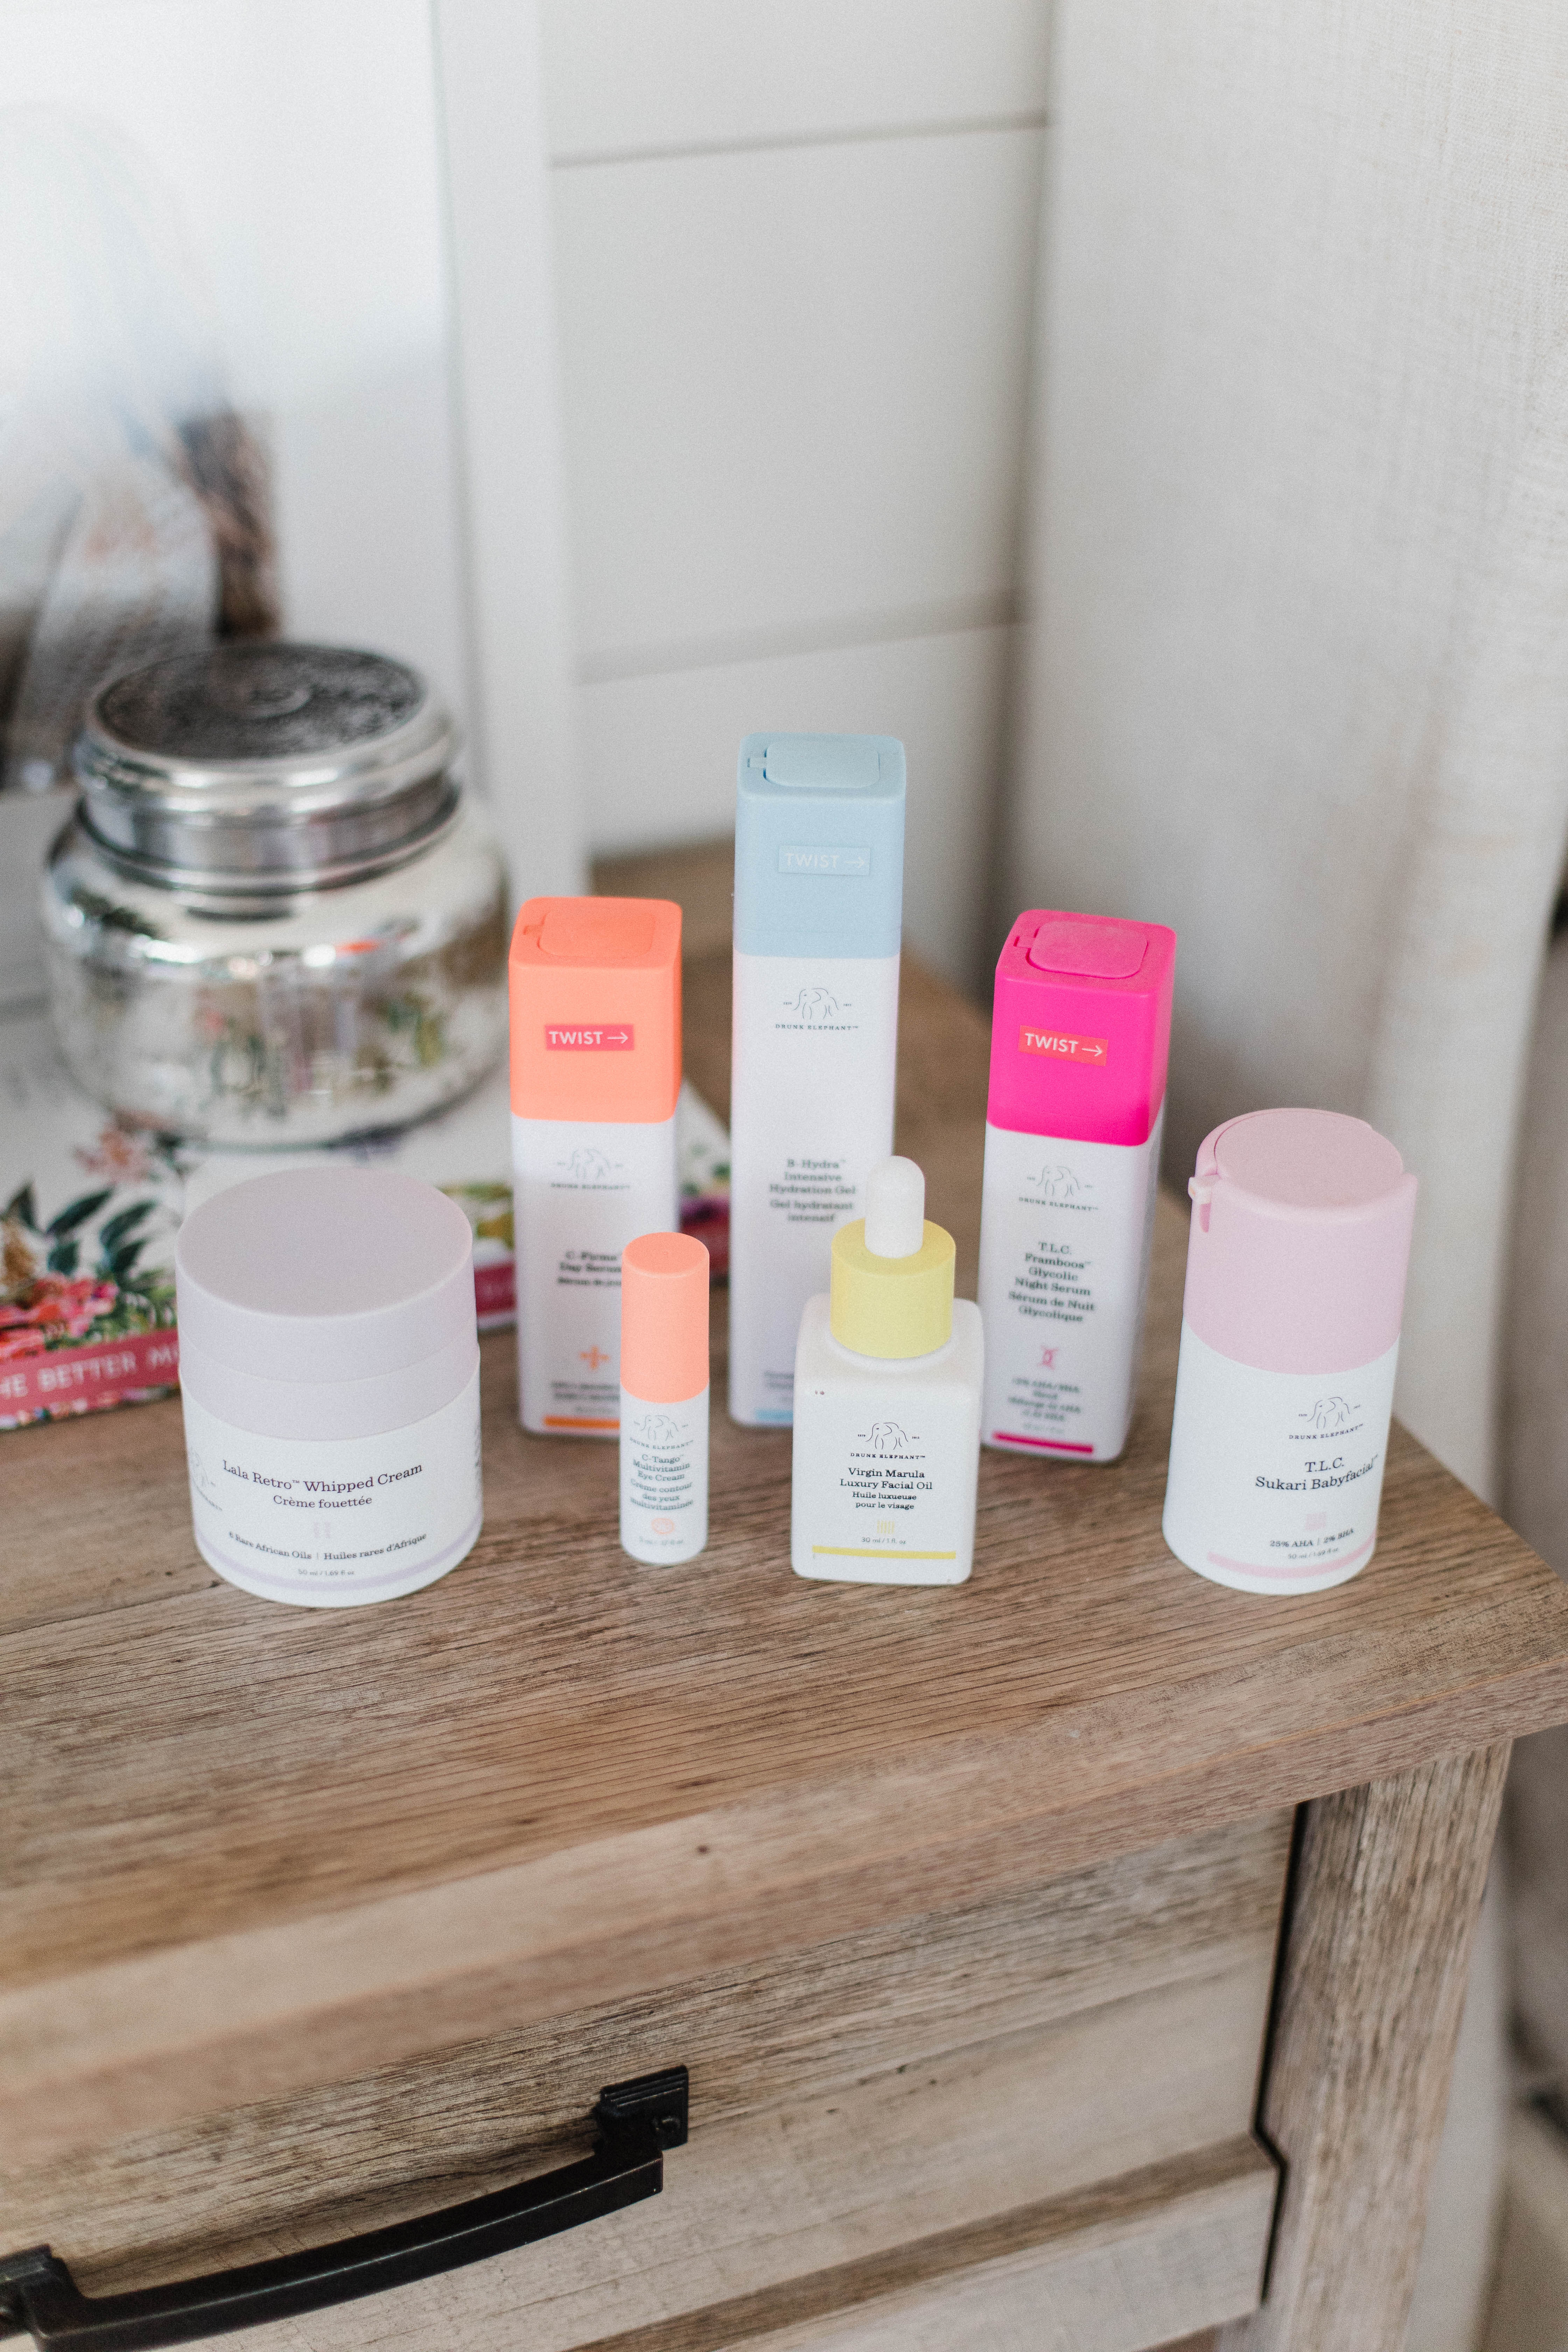 Connecticut life and style blogger Lauren McBride shares her favorite Drunk Elephant products available at Sephora, and the benefits each has for the skin.